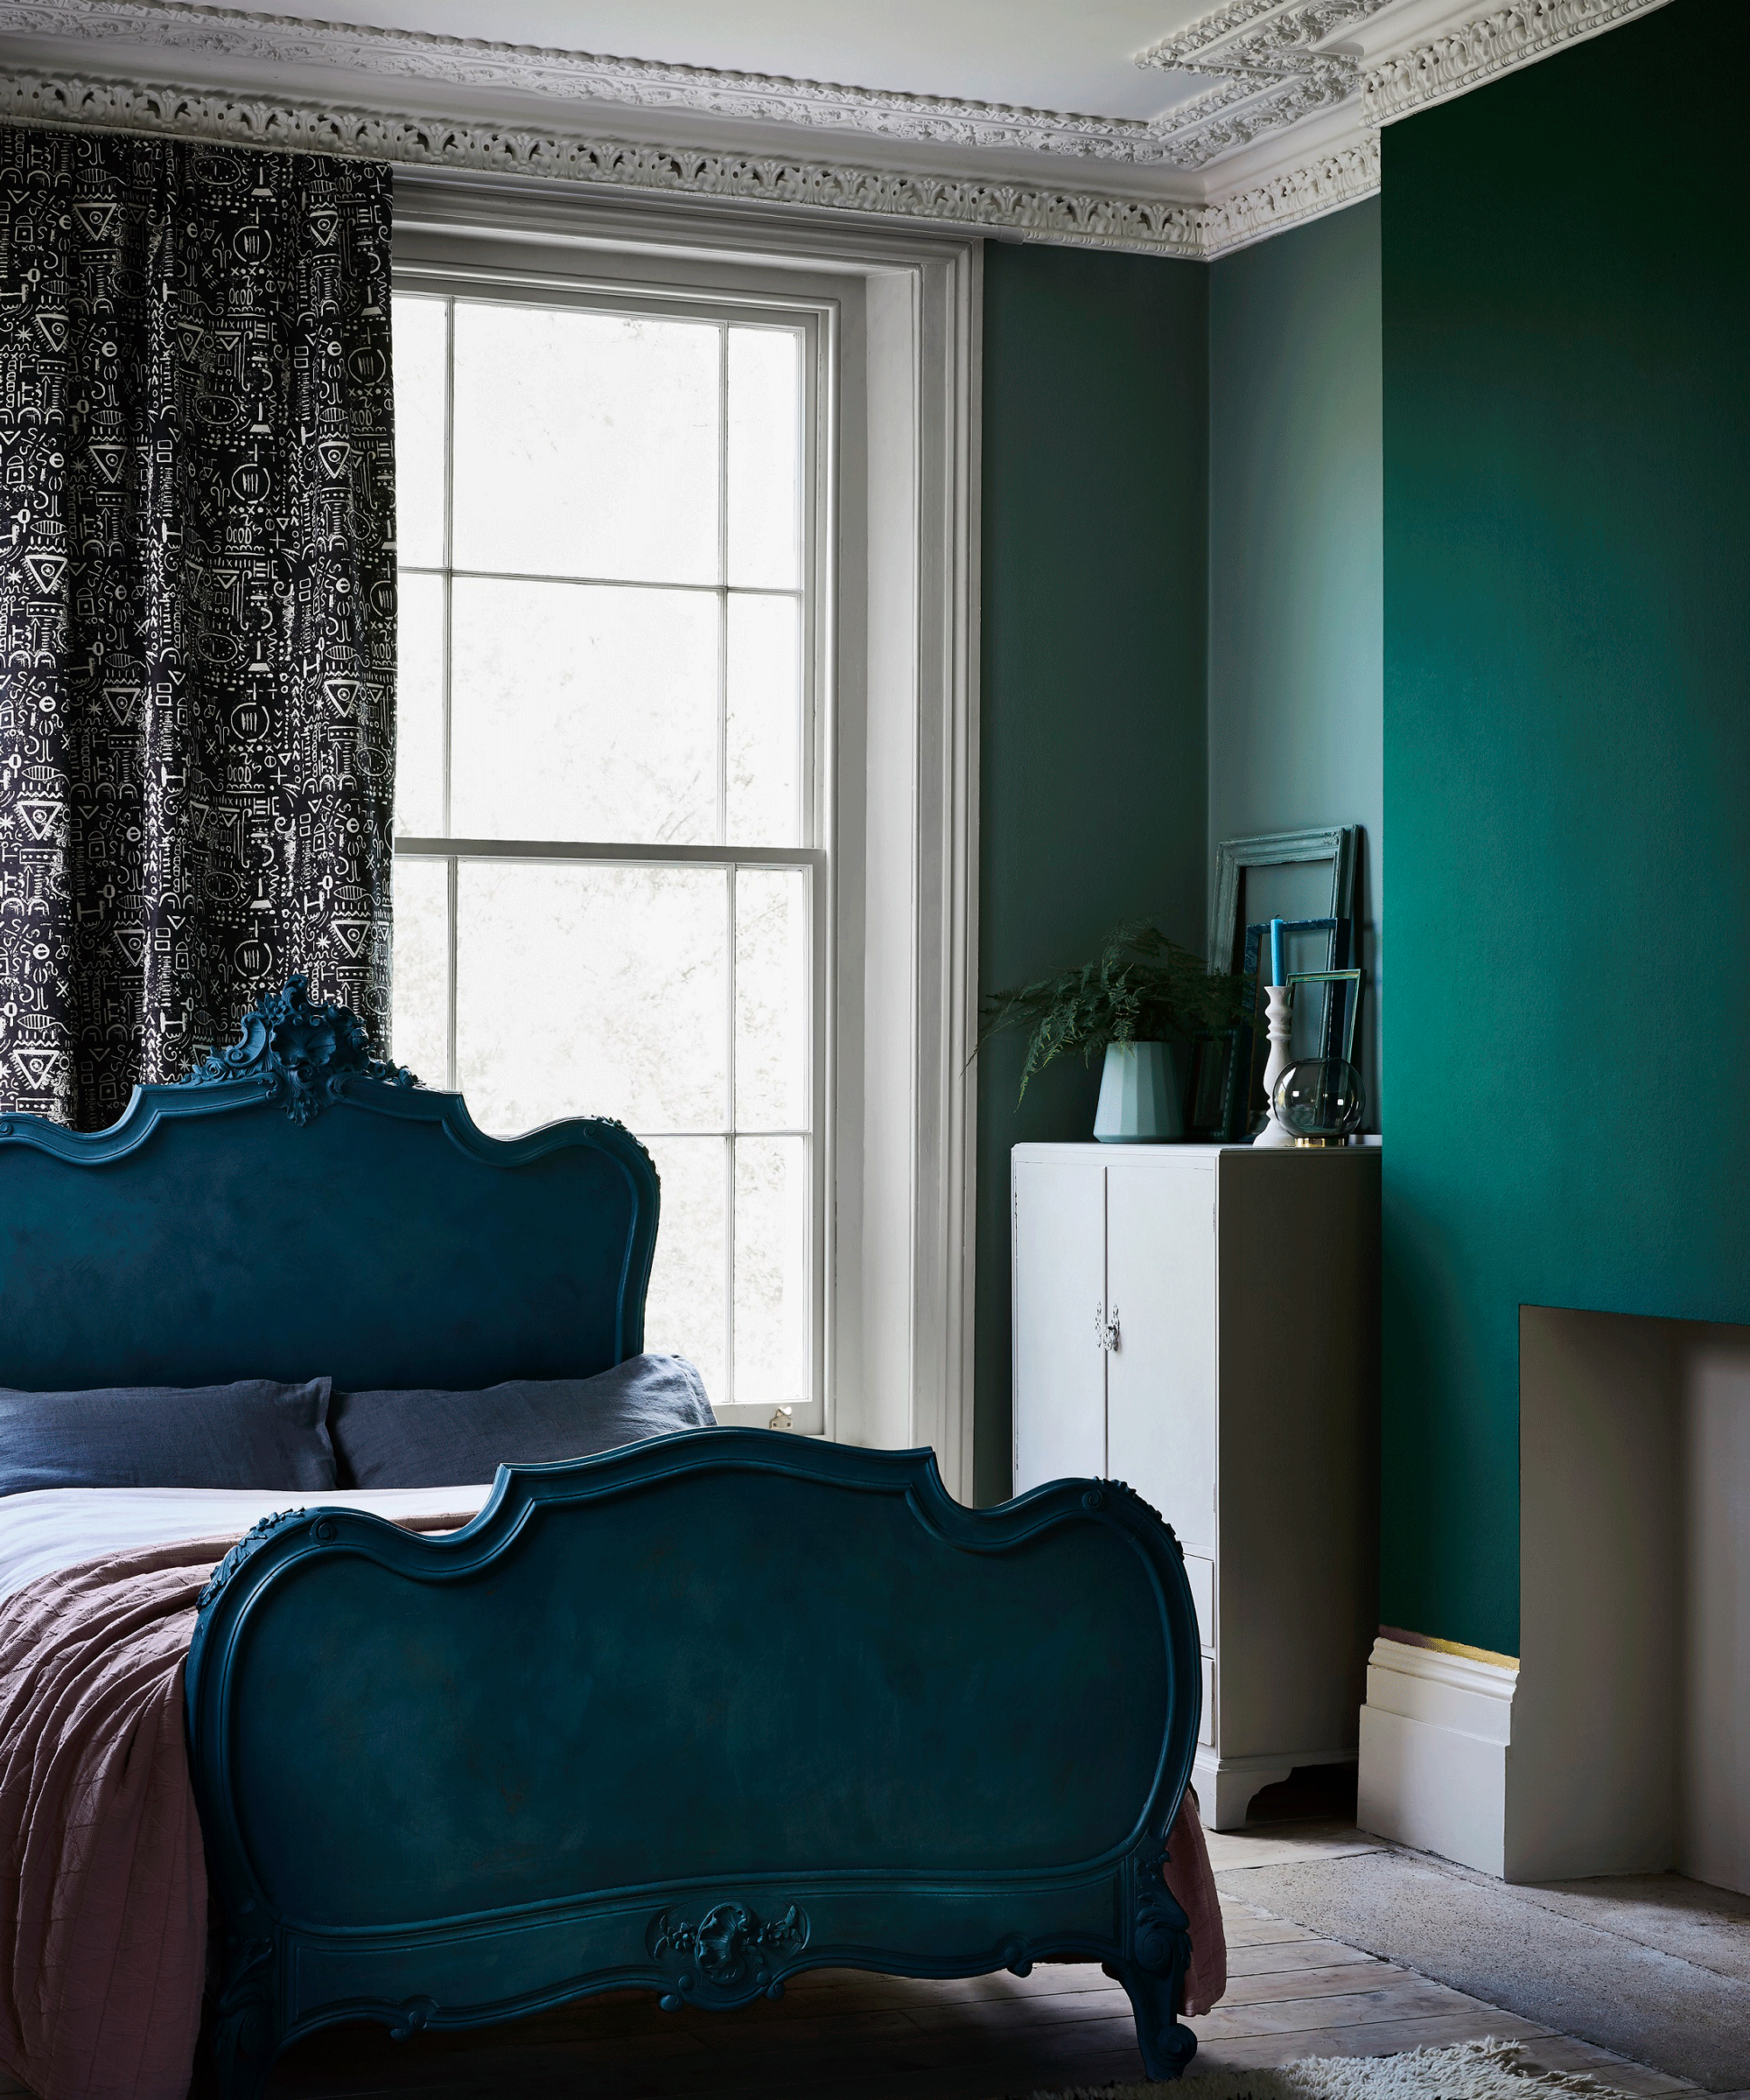 Bedroom with blue upholstered headboard and green walls